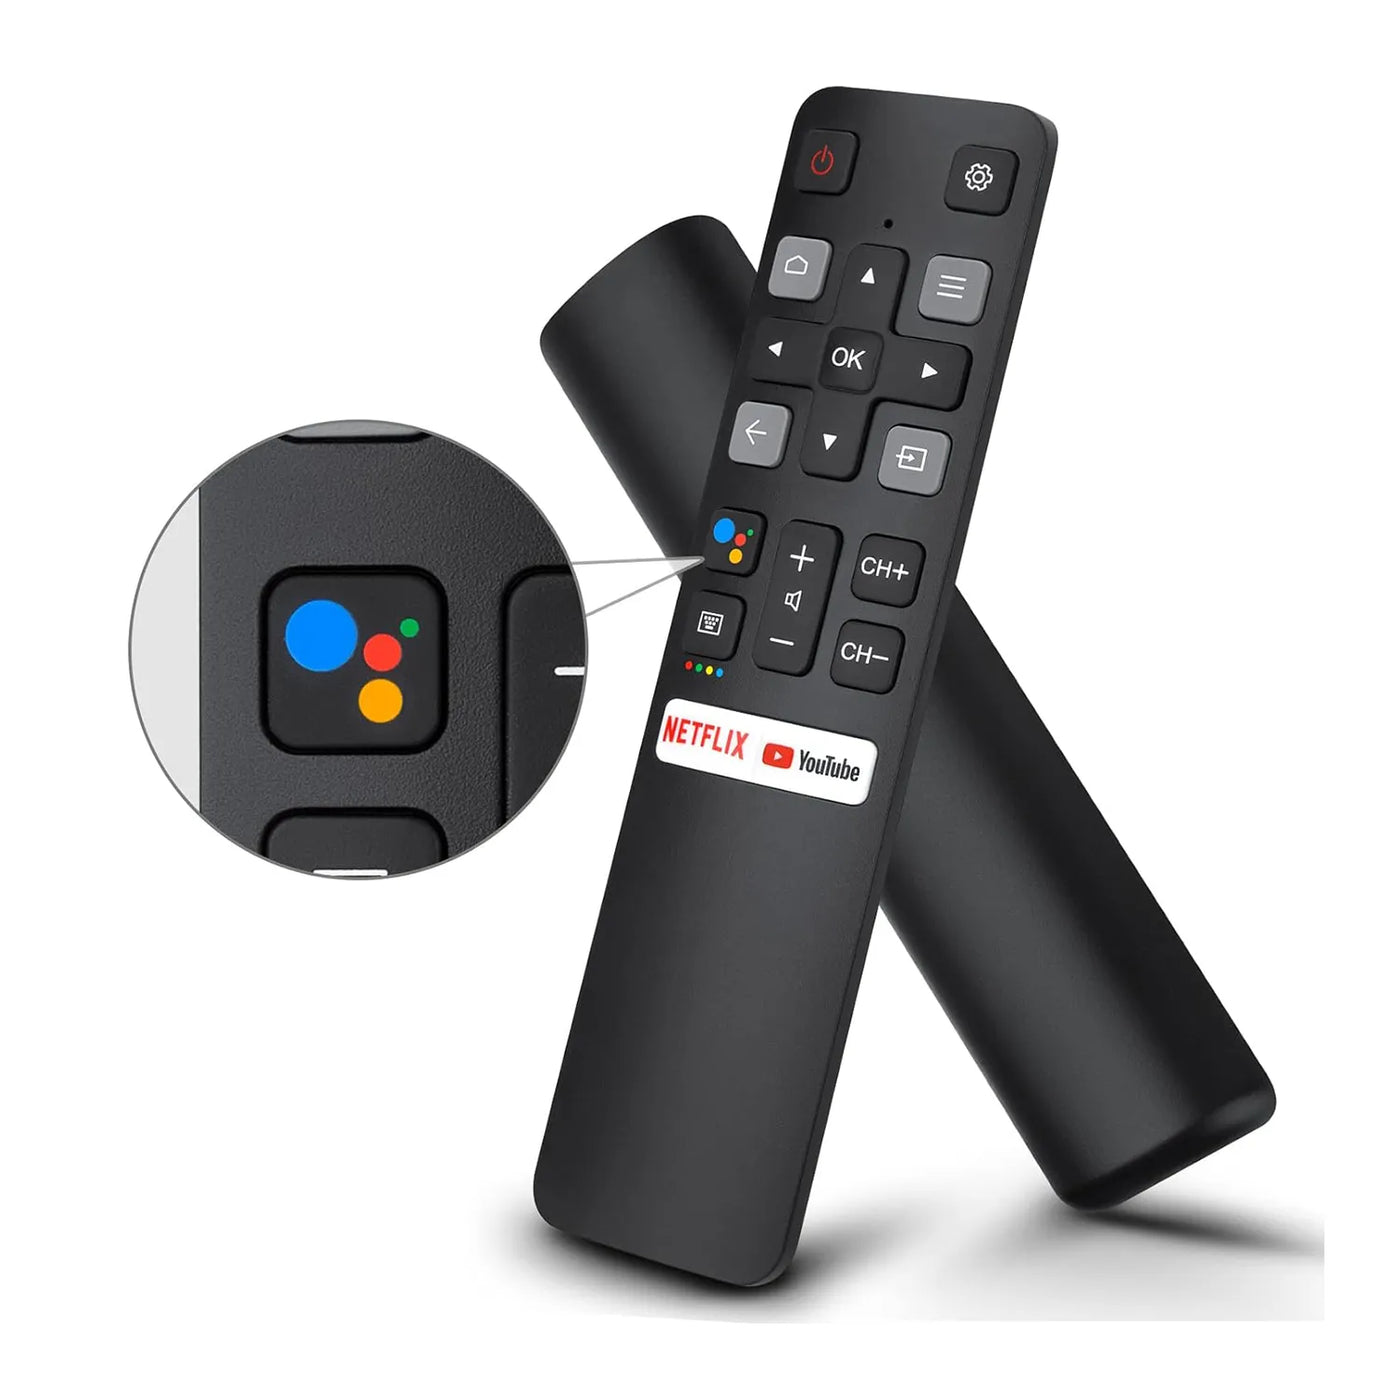 Muvit TCL Smart Tv Remote Control with Voice Control